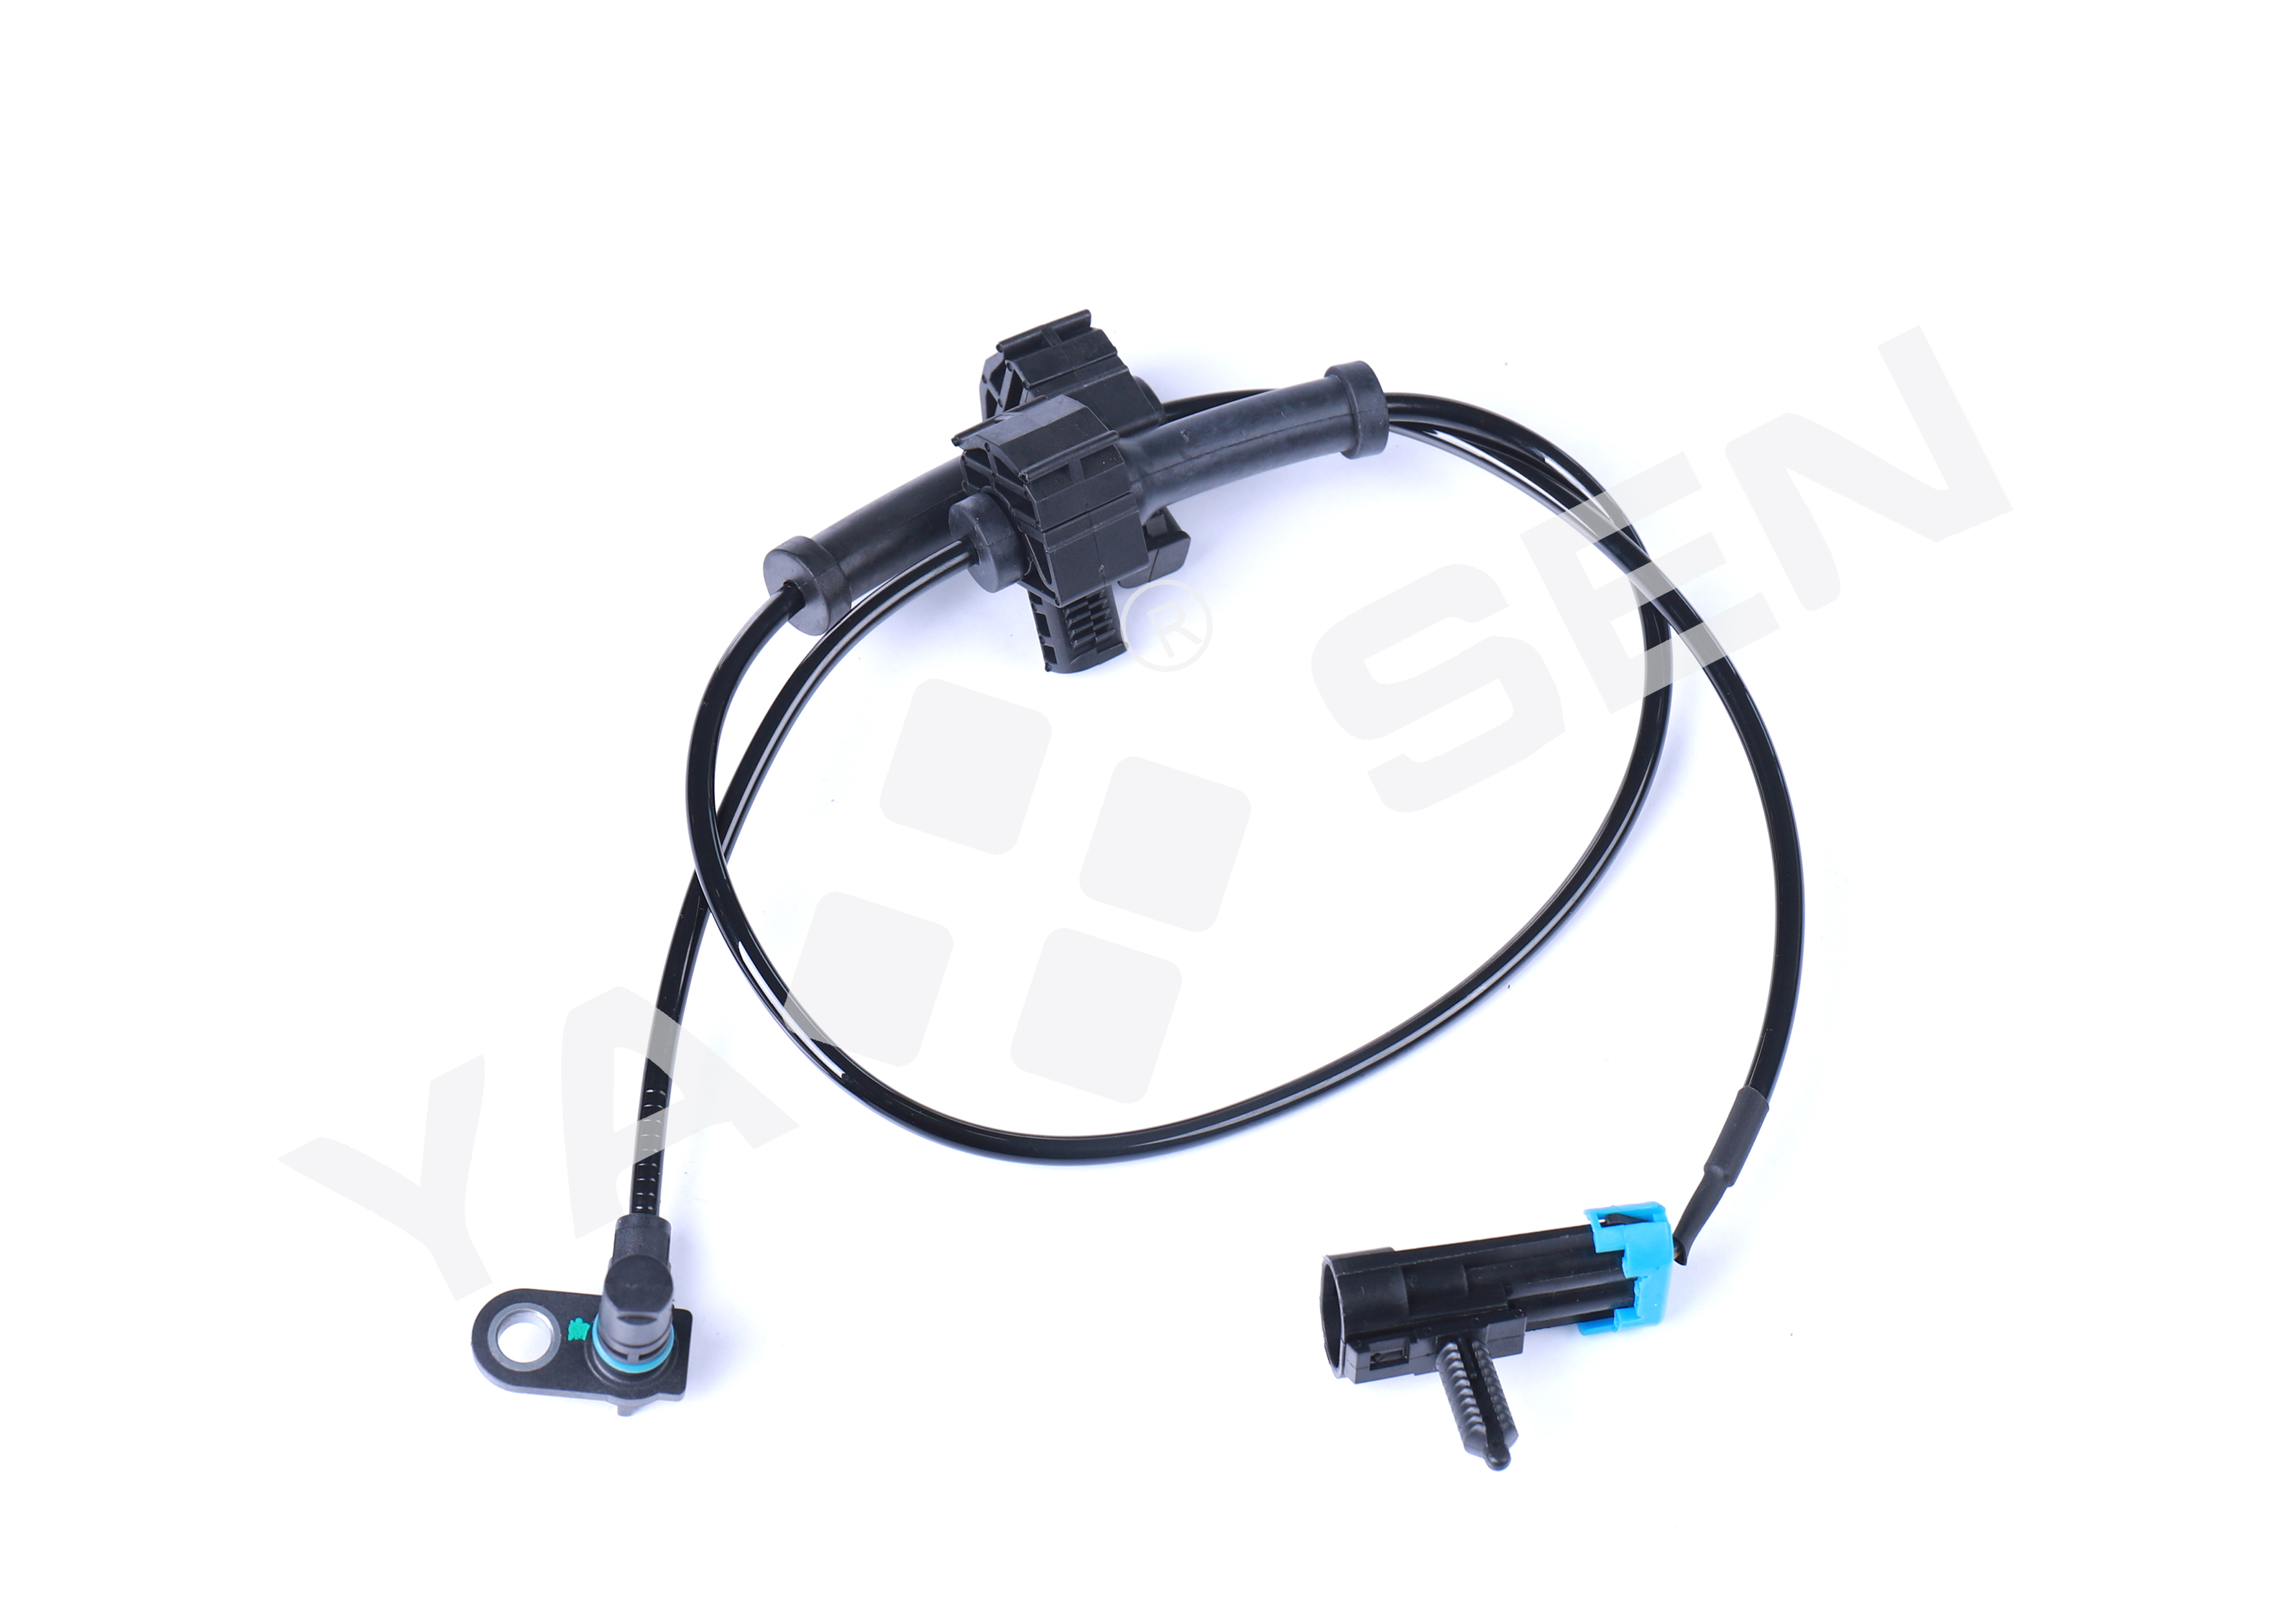 ABS Wheel Speed Sensor for CHEVROLET/FORD, 10384745 15872664 20763148 20938121 ALS1757 5S7975 SU9441 695147